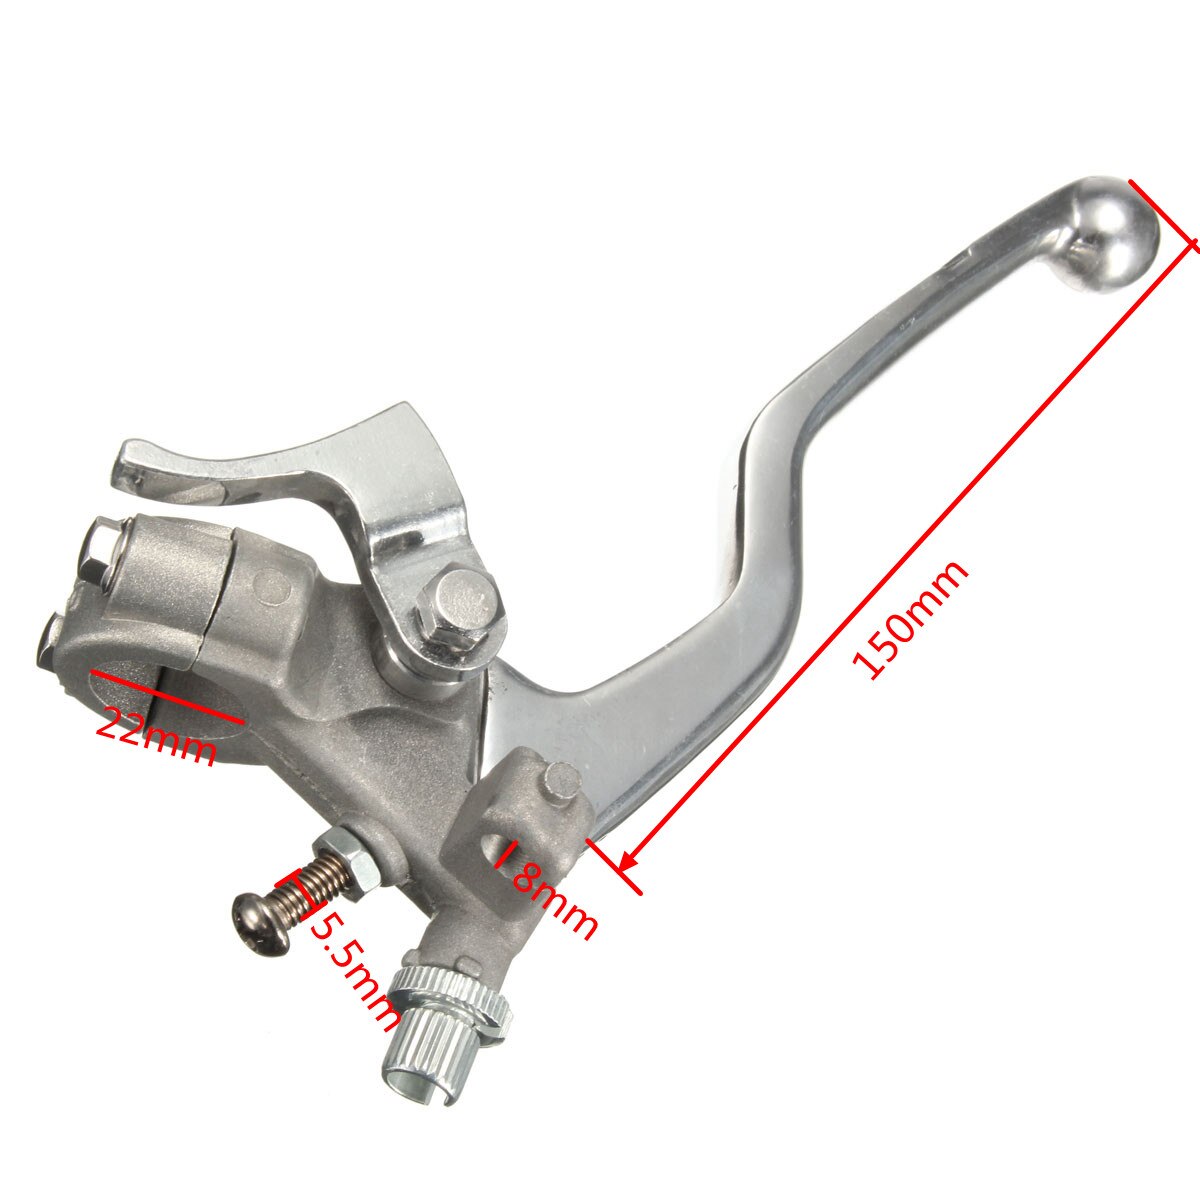 Gray Motorcycle 22mm Front Brake Clutch Master Cylinder Lever For HONDA CR125R 250R CRF250R 450R CRF250X 450X